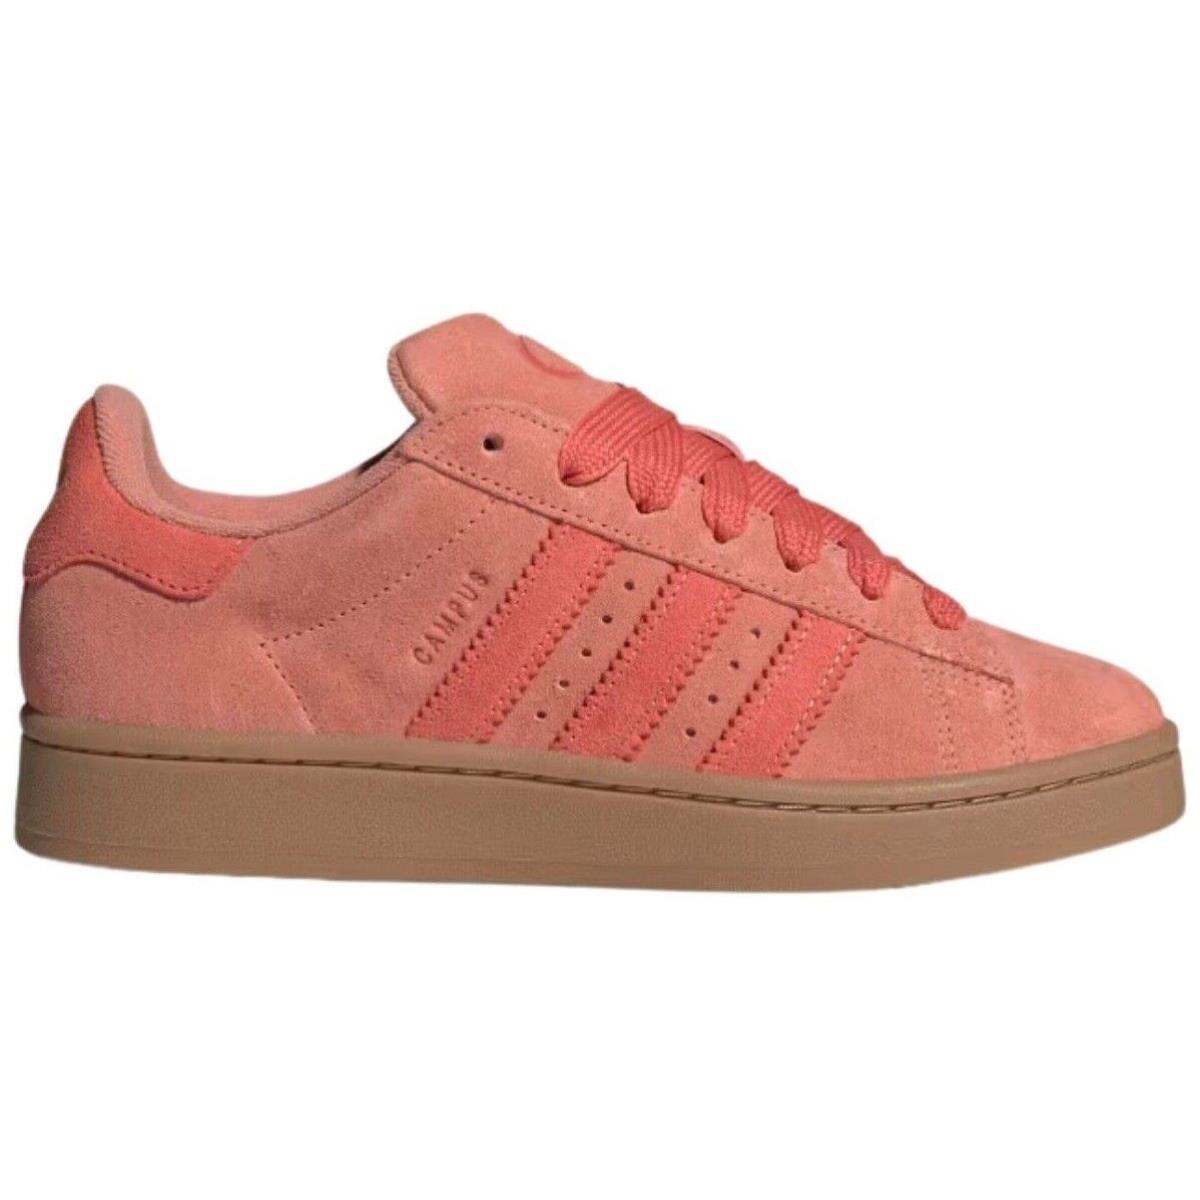 Adidas Originals Campus 00S Women`s Casual Shoes All Colors US Szs 5-11 Wonder Clay / Preloved Scarlet / Gold Metallic